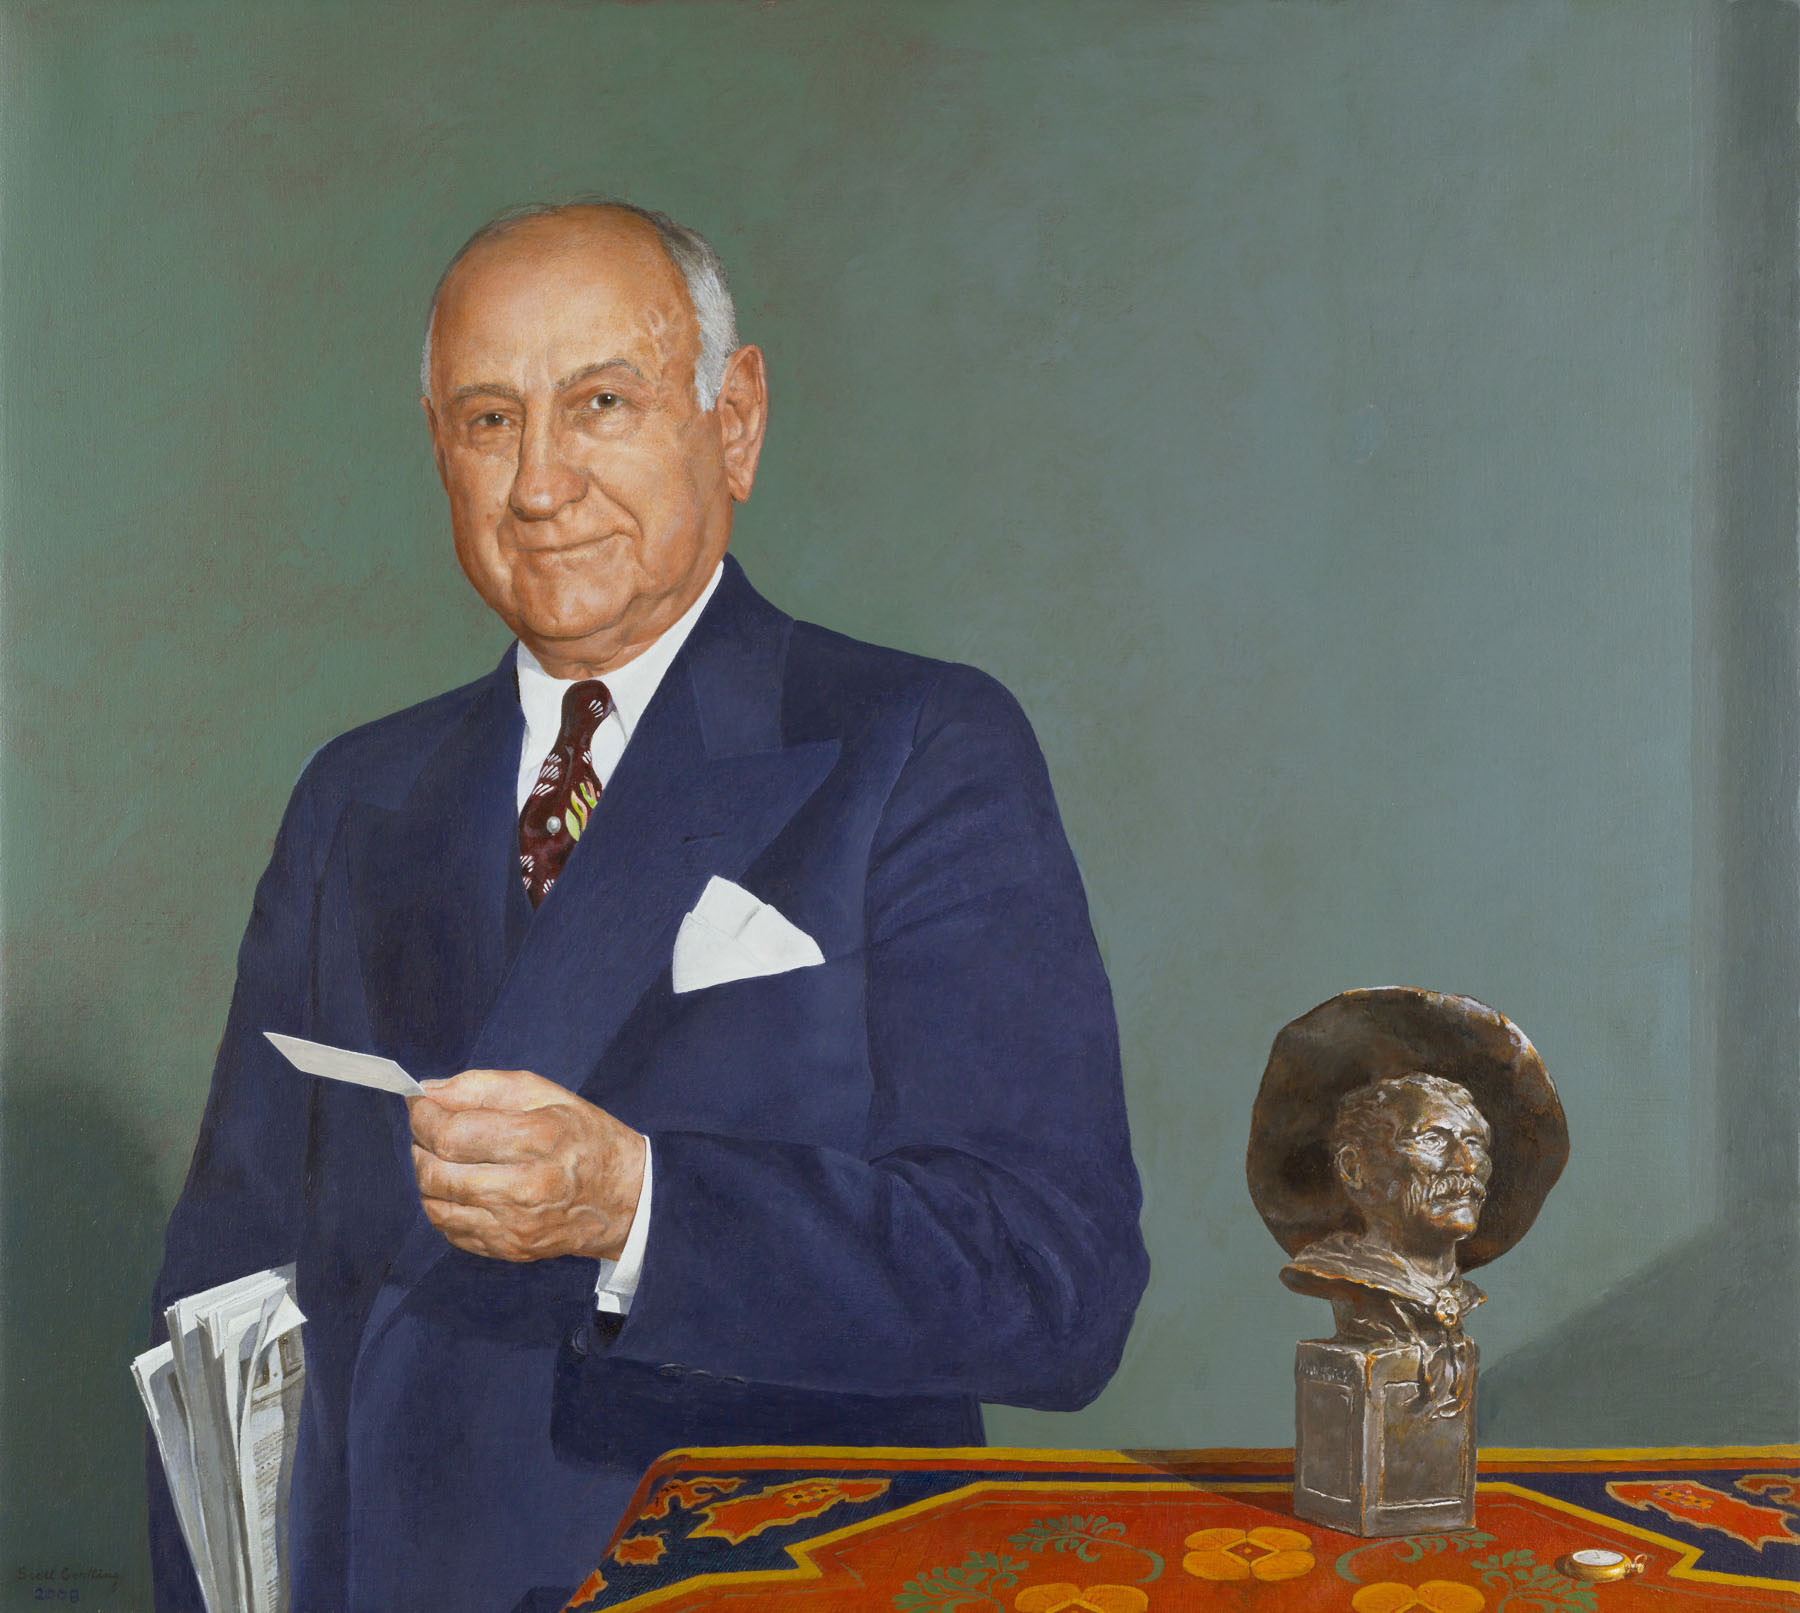 Painting of a man holding newspapers under his arm and standing next to a table on which sits a sculpture.